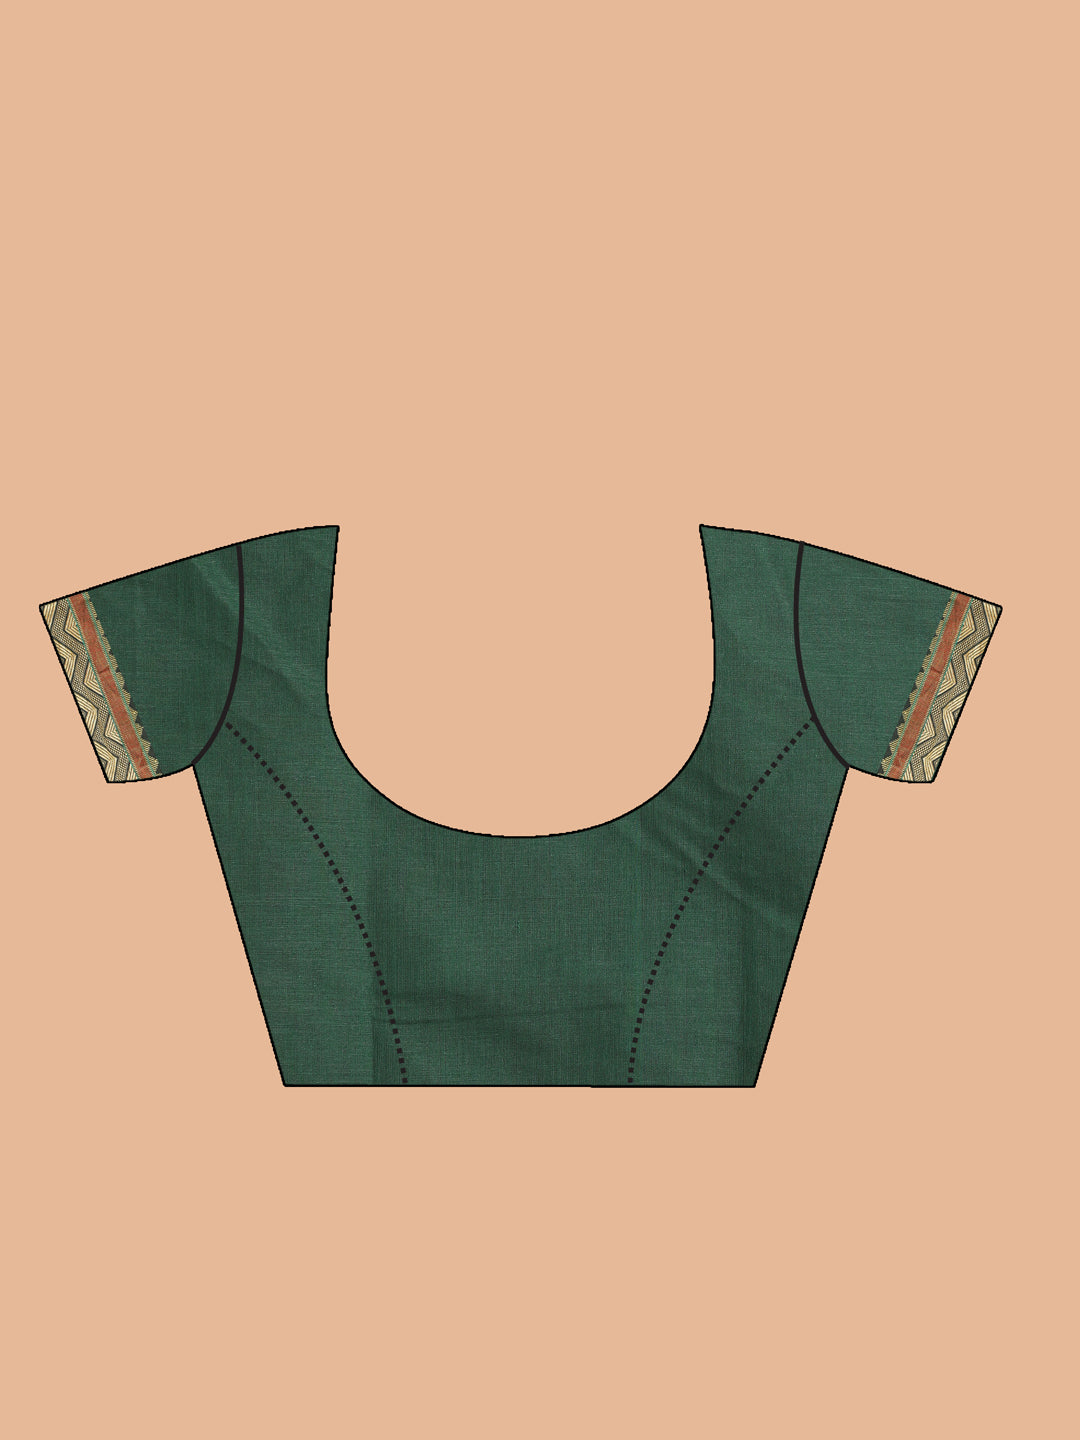 Indethnic Bottle Green Pure Cotton Solid Saree - Blouse Piece View